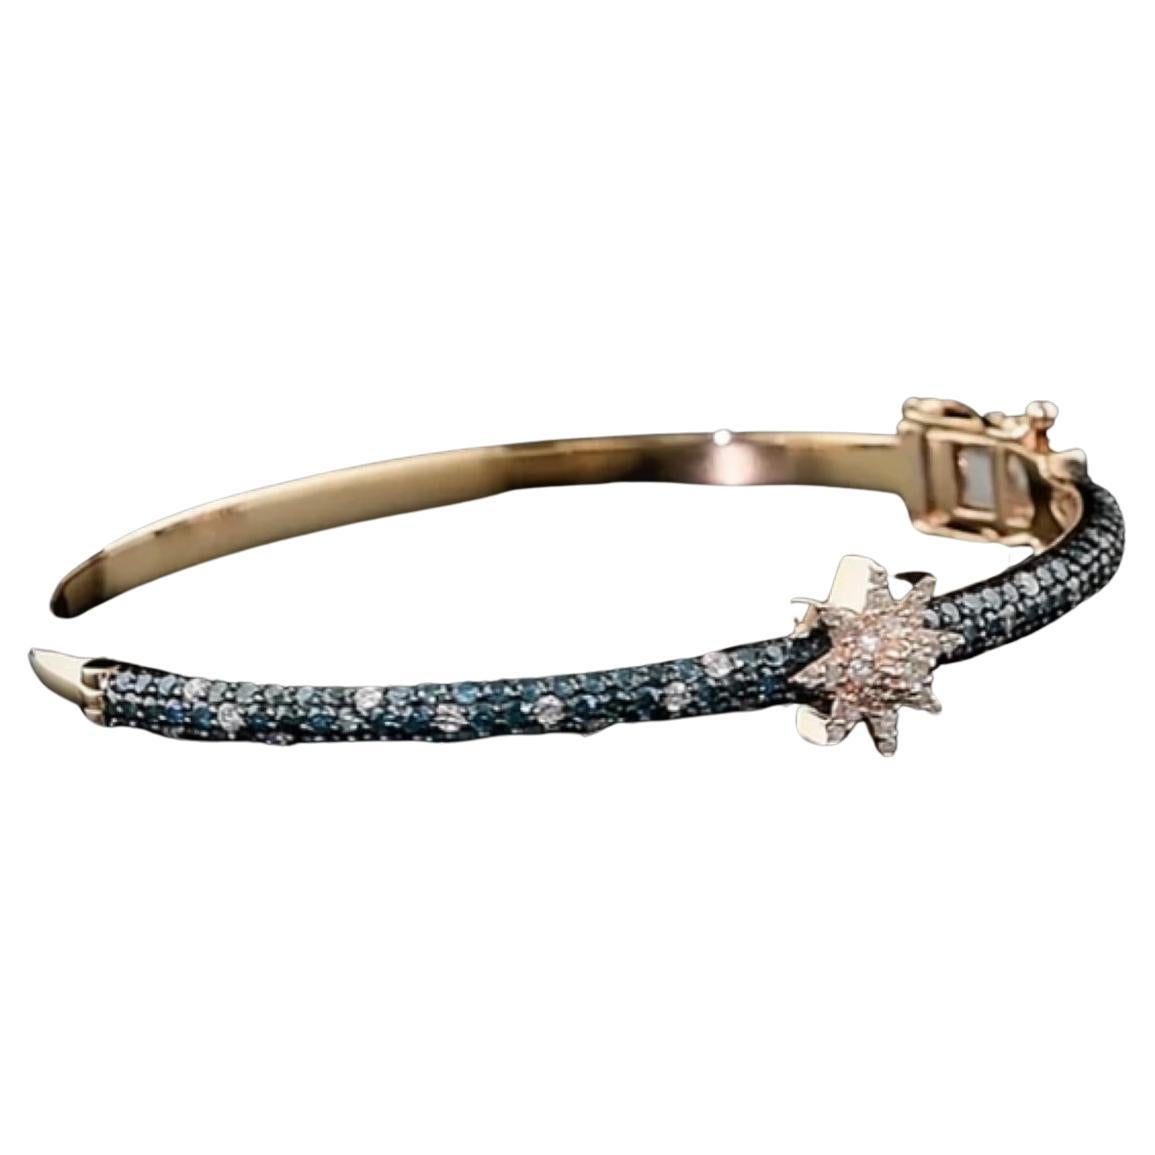 Venus Blue Diamond Gold Bangle
Crafted from 14k Rose Gold and embellished with a 0.45 Ct G-VS-SI Diamond and a 1.12 Ct Blue Diamond, this exquisite talisman measures 6 cm in diameter, representing not only elegance and refinement but also the